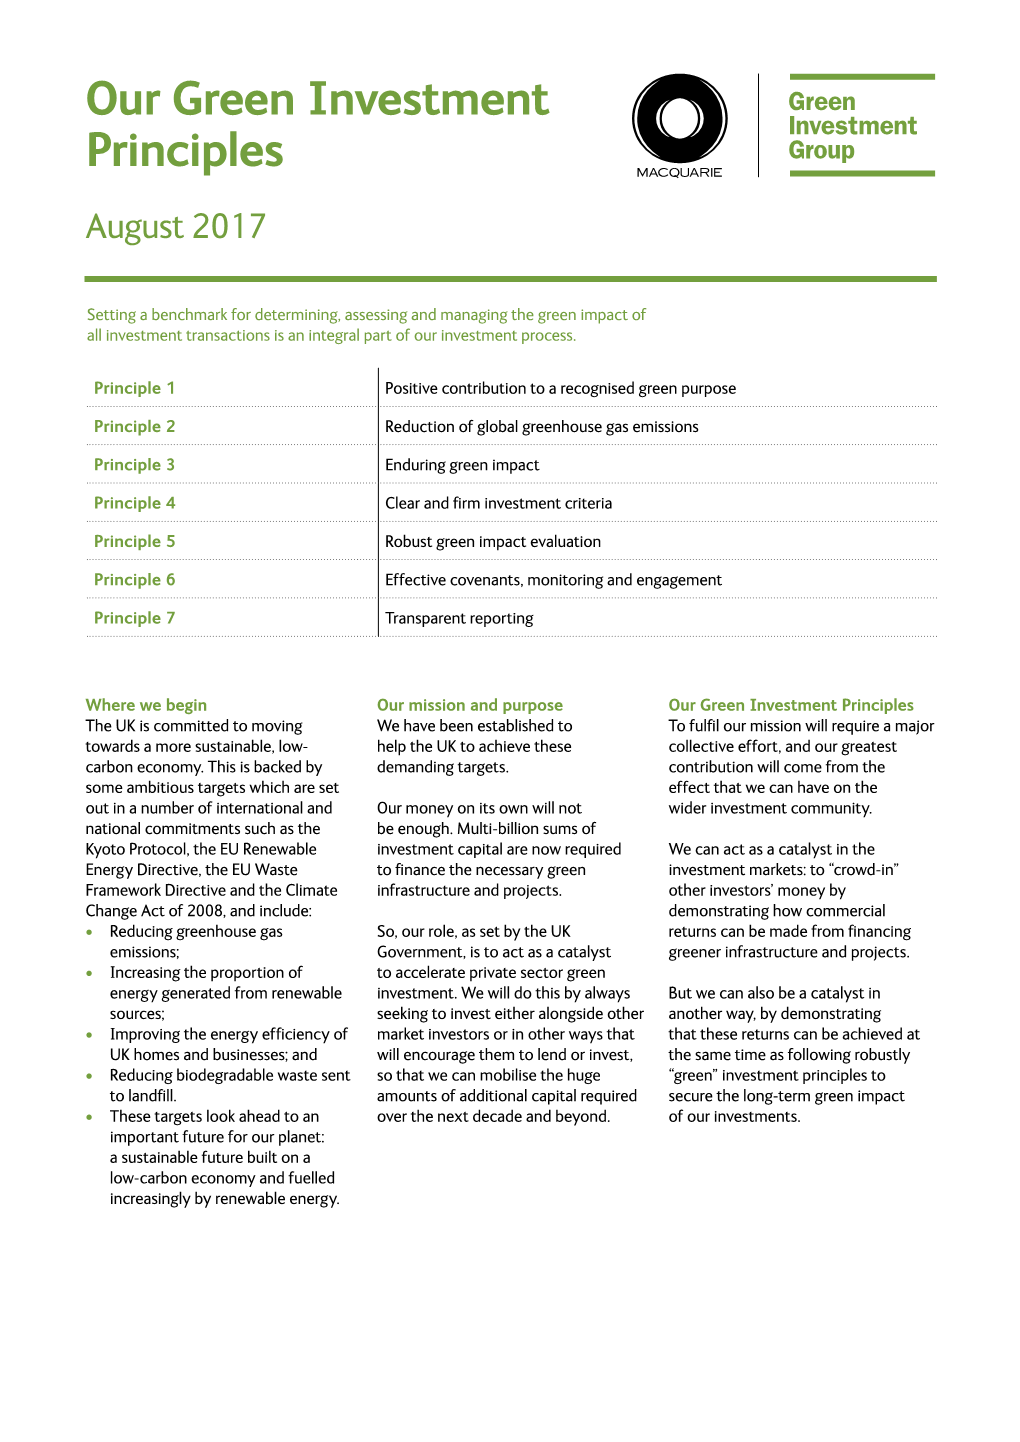 Our Green Investment Principles August 2017